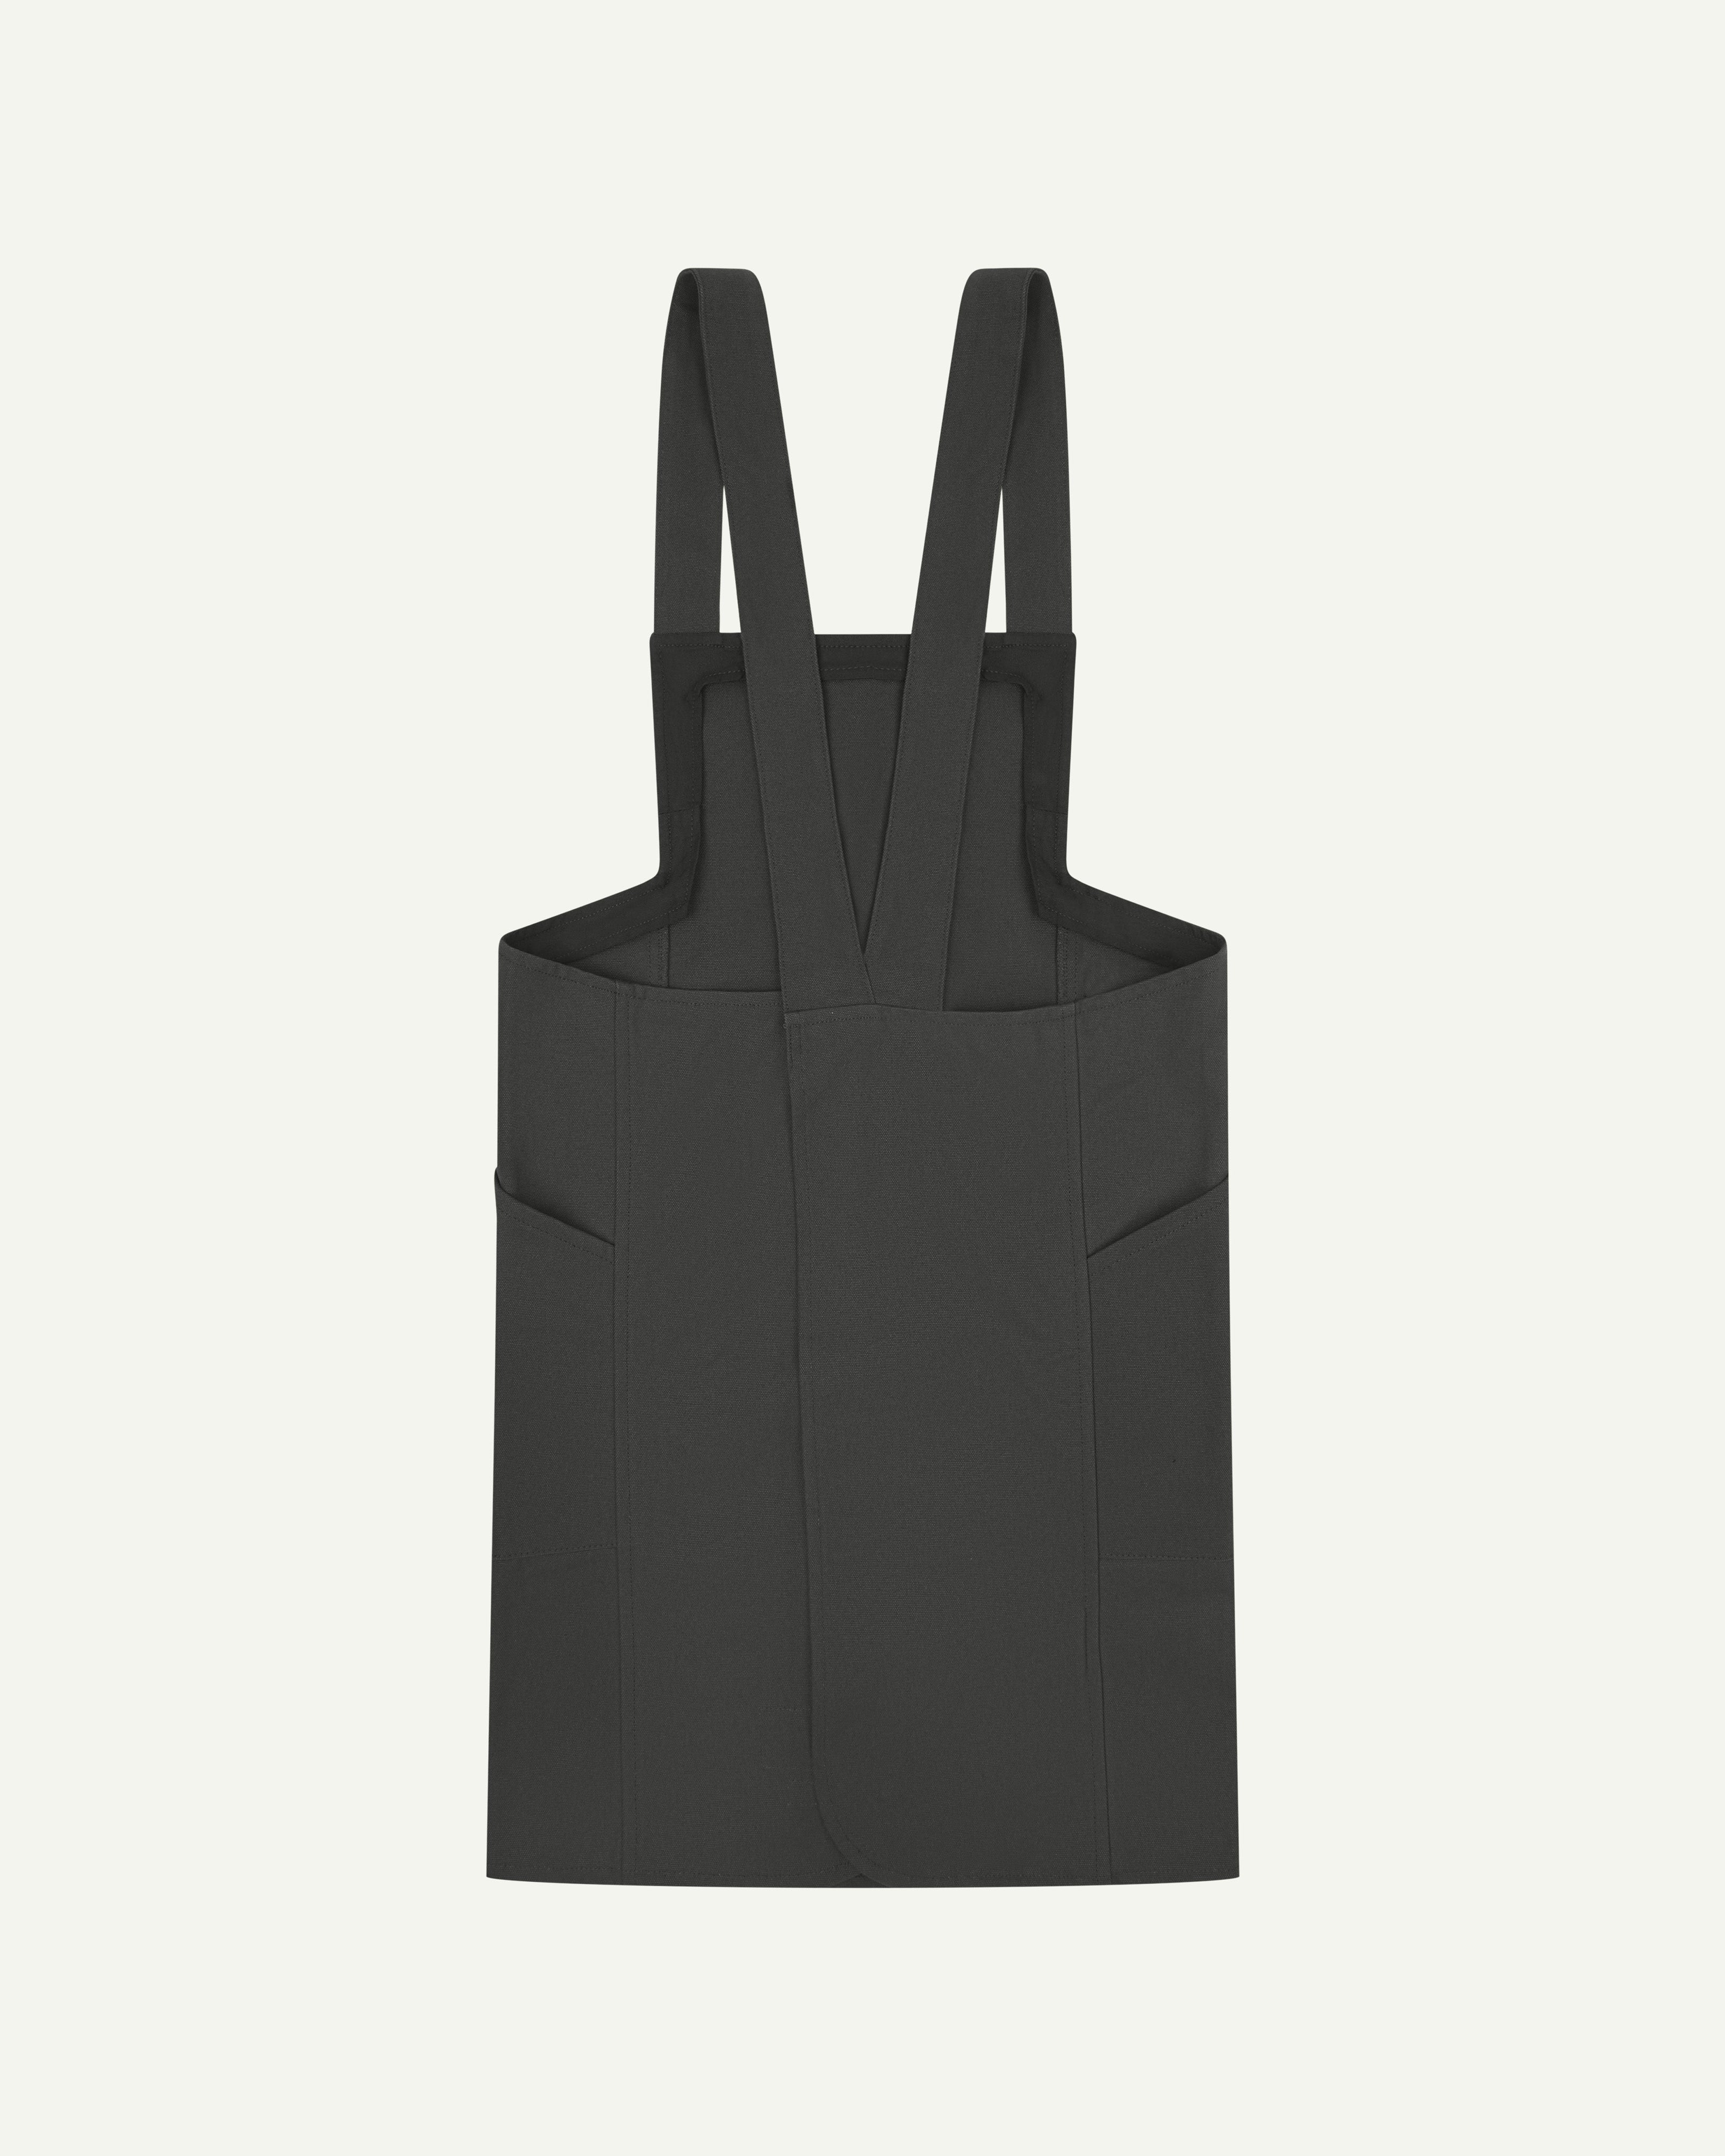 #9003 japanese-style canvas apron - charcoal